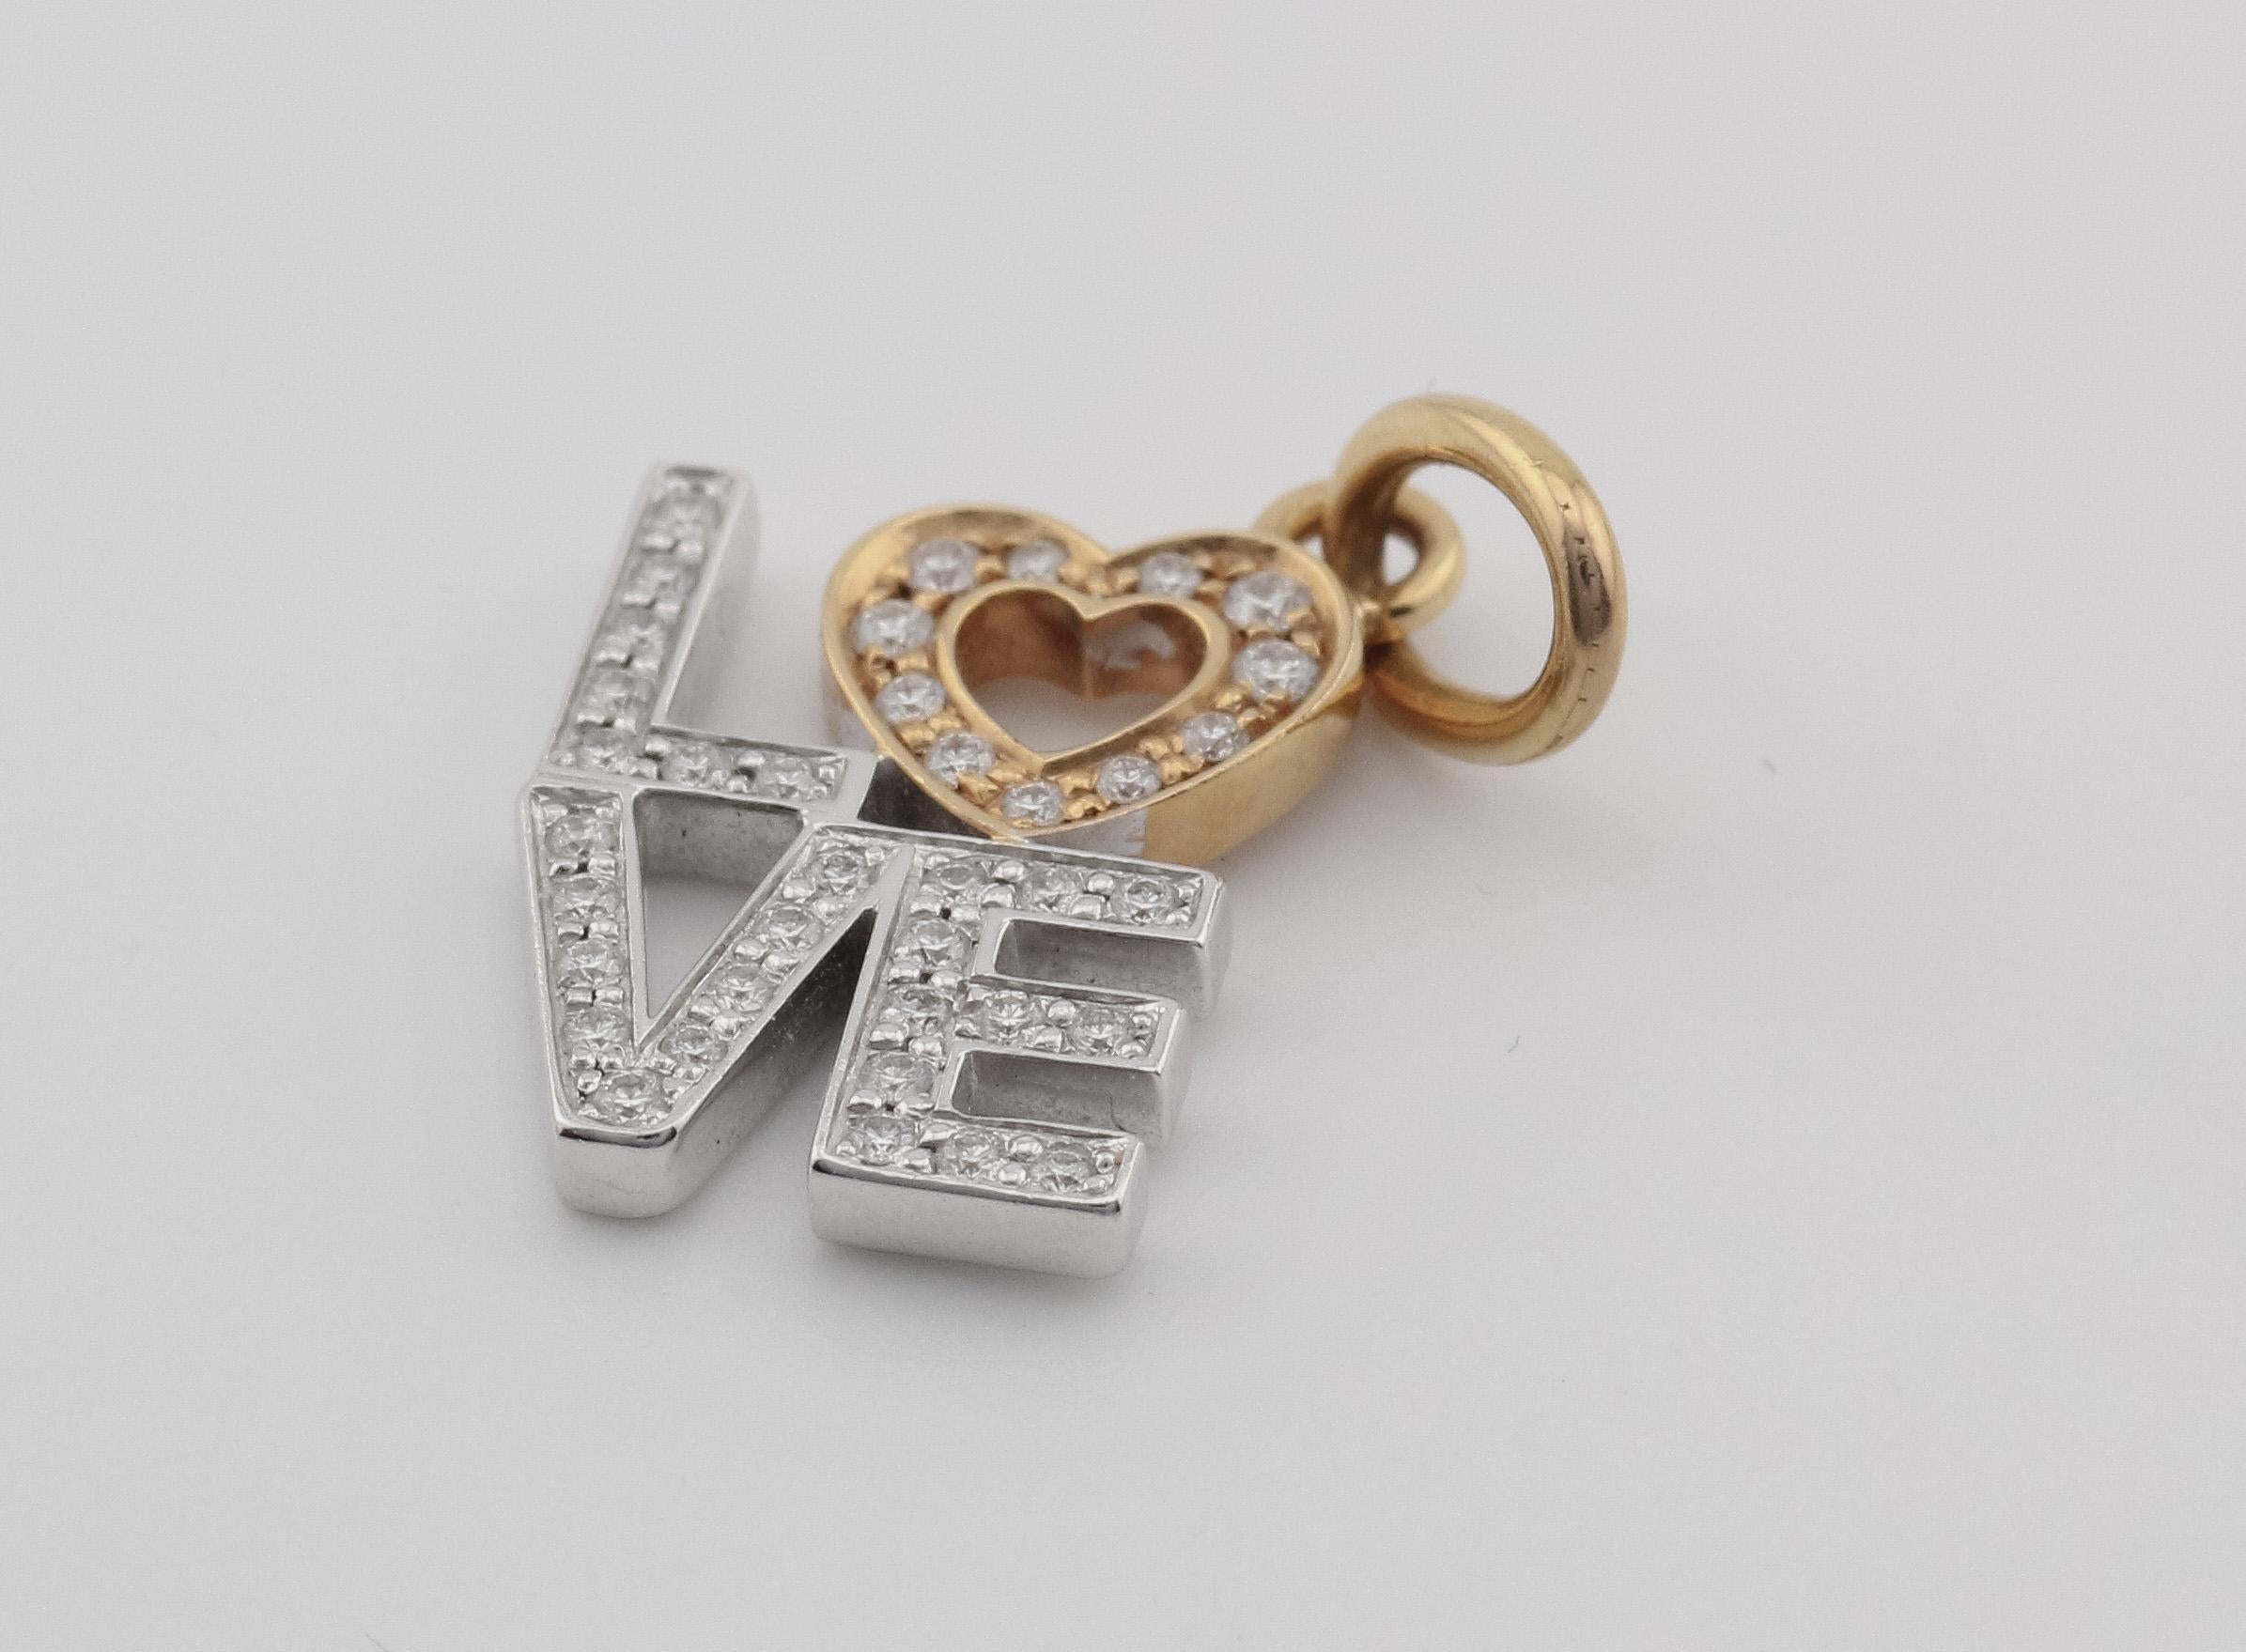 Presenting the Tiffany & Co. Diamond 18K White and Pink Gold Love Charm Pendant—an enchanting declaration of affection and timeless elegance. Crafted by the renowned luxury house, Tiffany & Co., this pendant embodies the spirit of love with